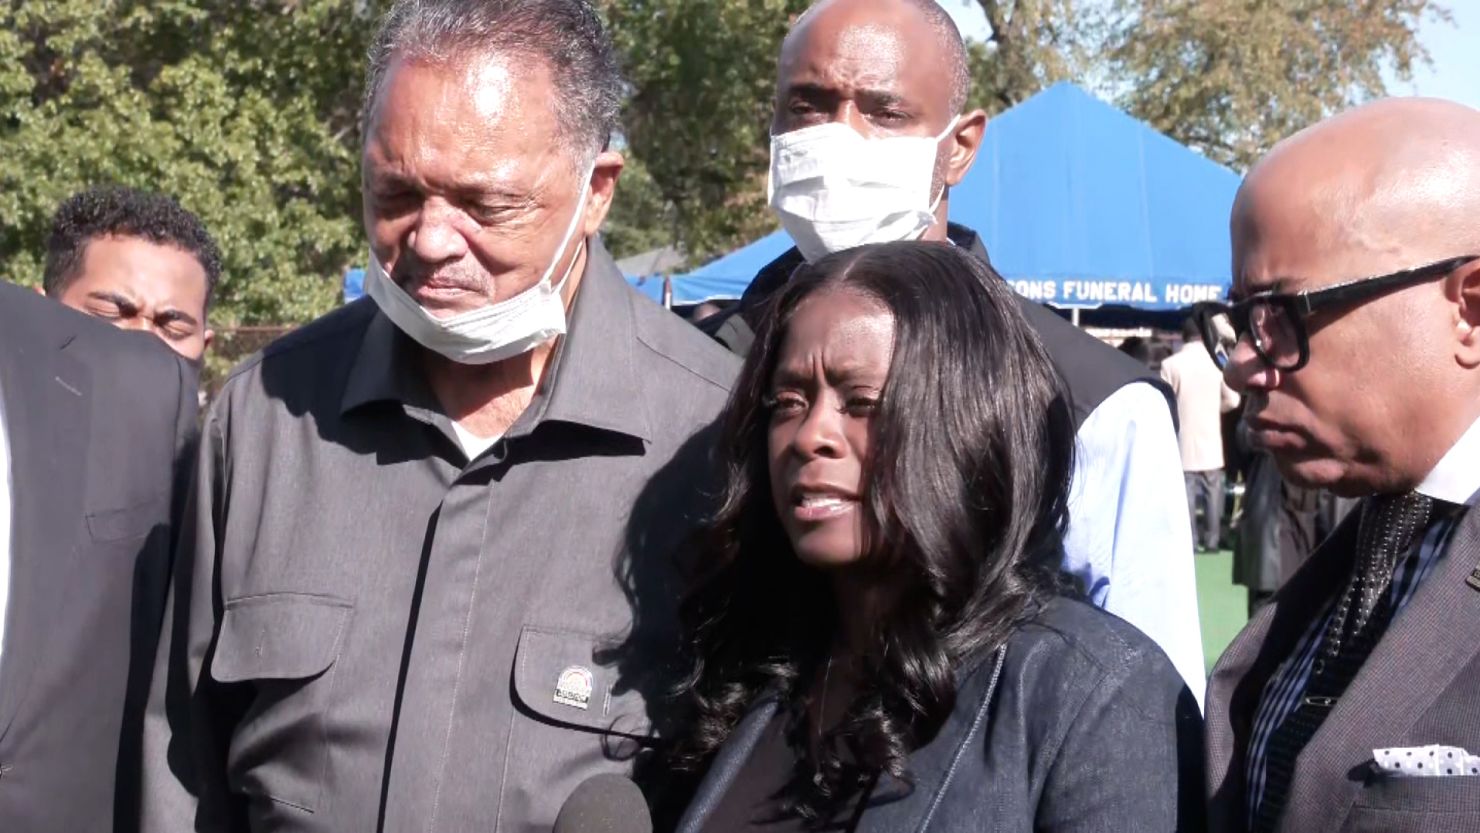 Carmen Bolden Day, center, is urging the FBI to get involved in the investigation of her son Jelani Day's death. The Rev. Jesse Jackson, left, joined her during Day's funeral earlier this week.